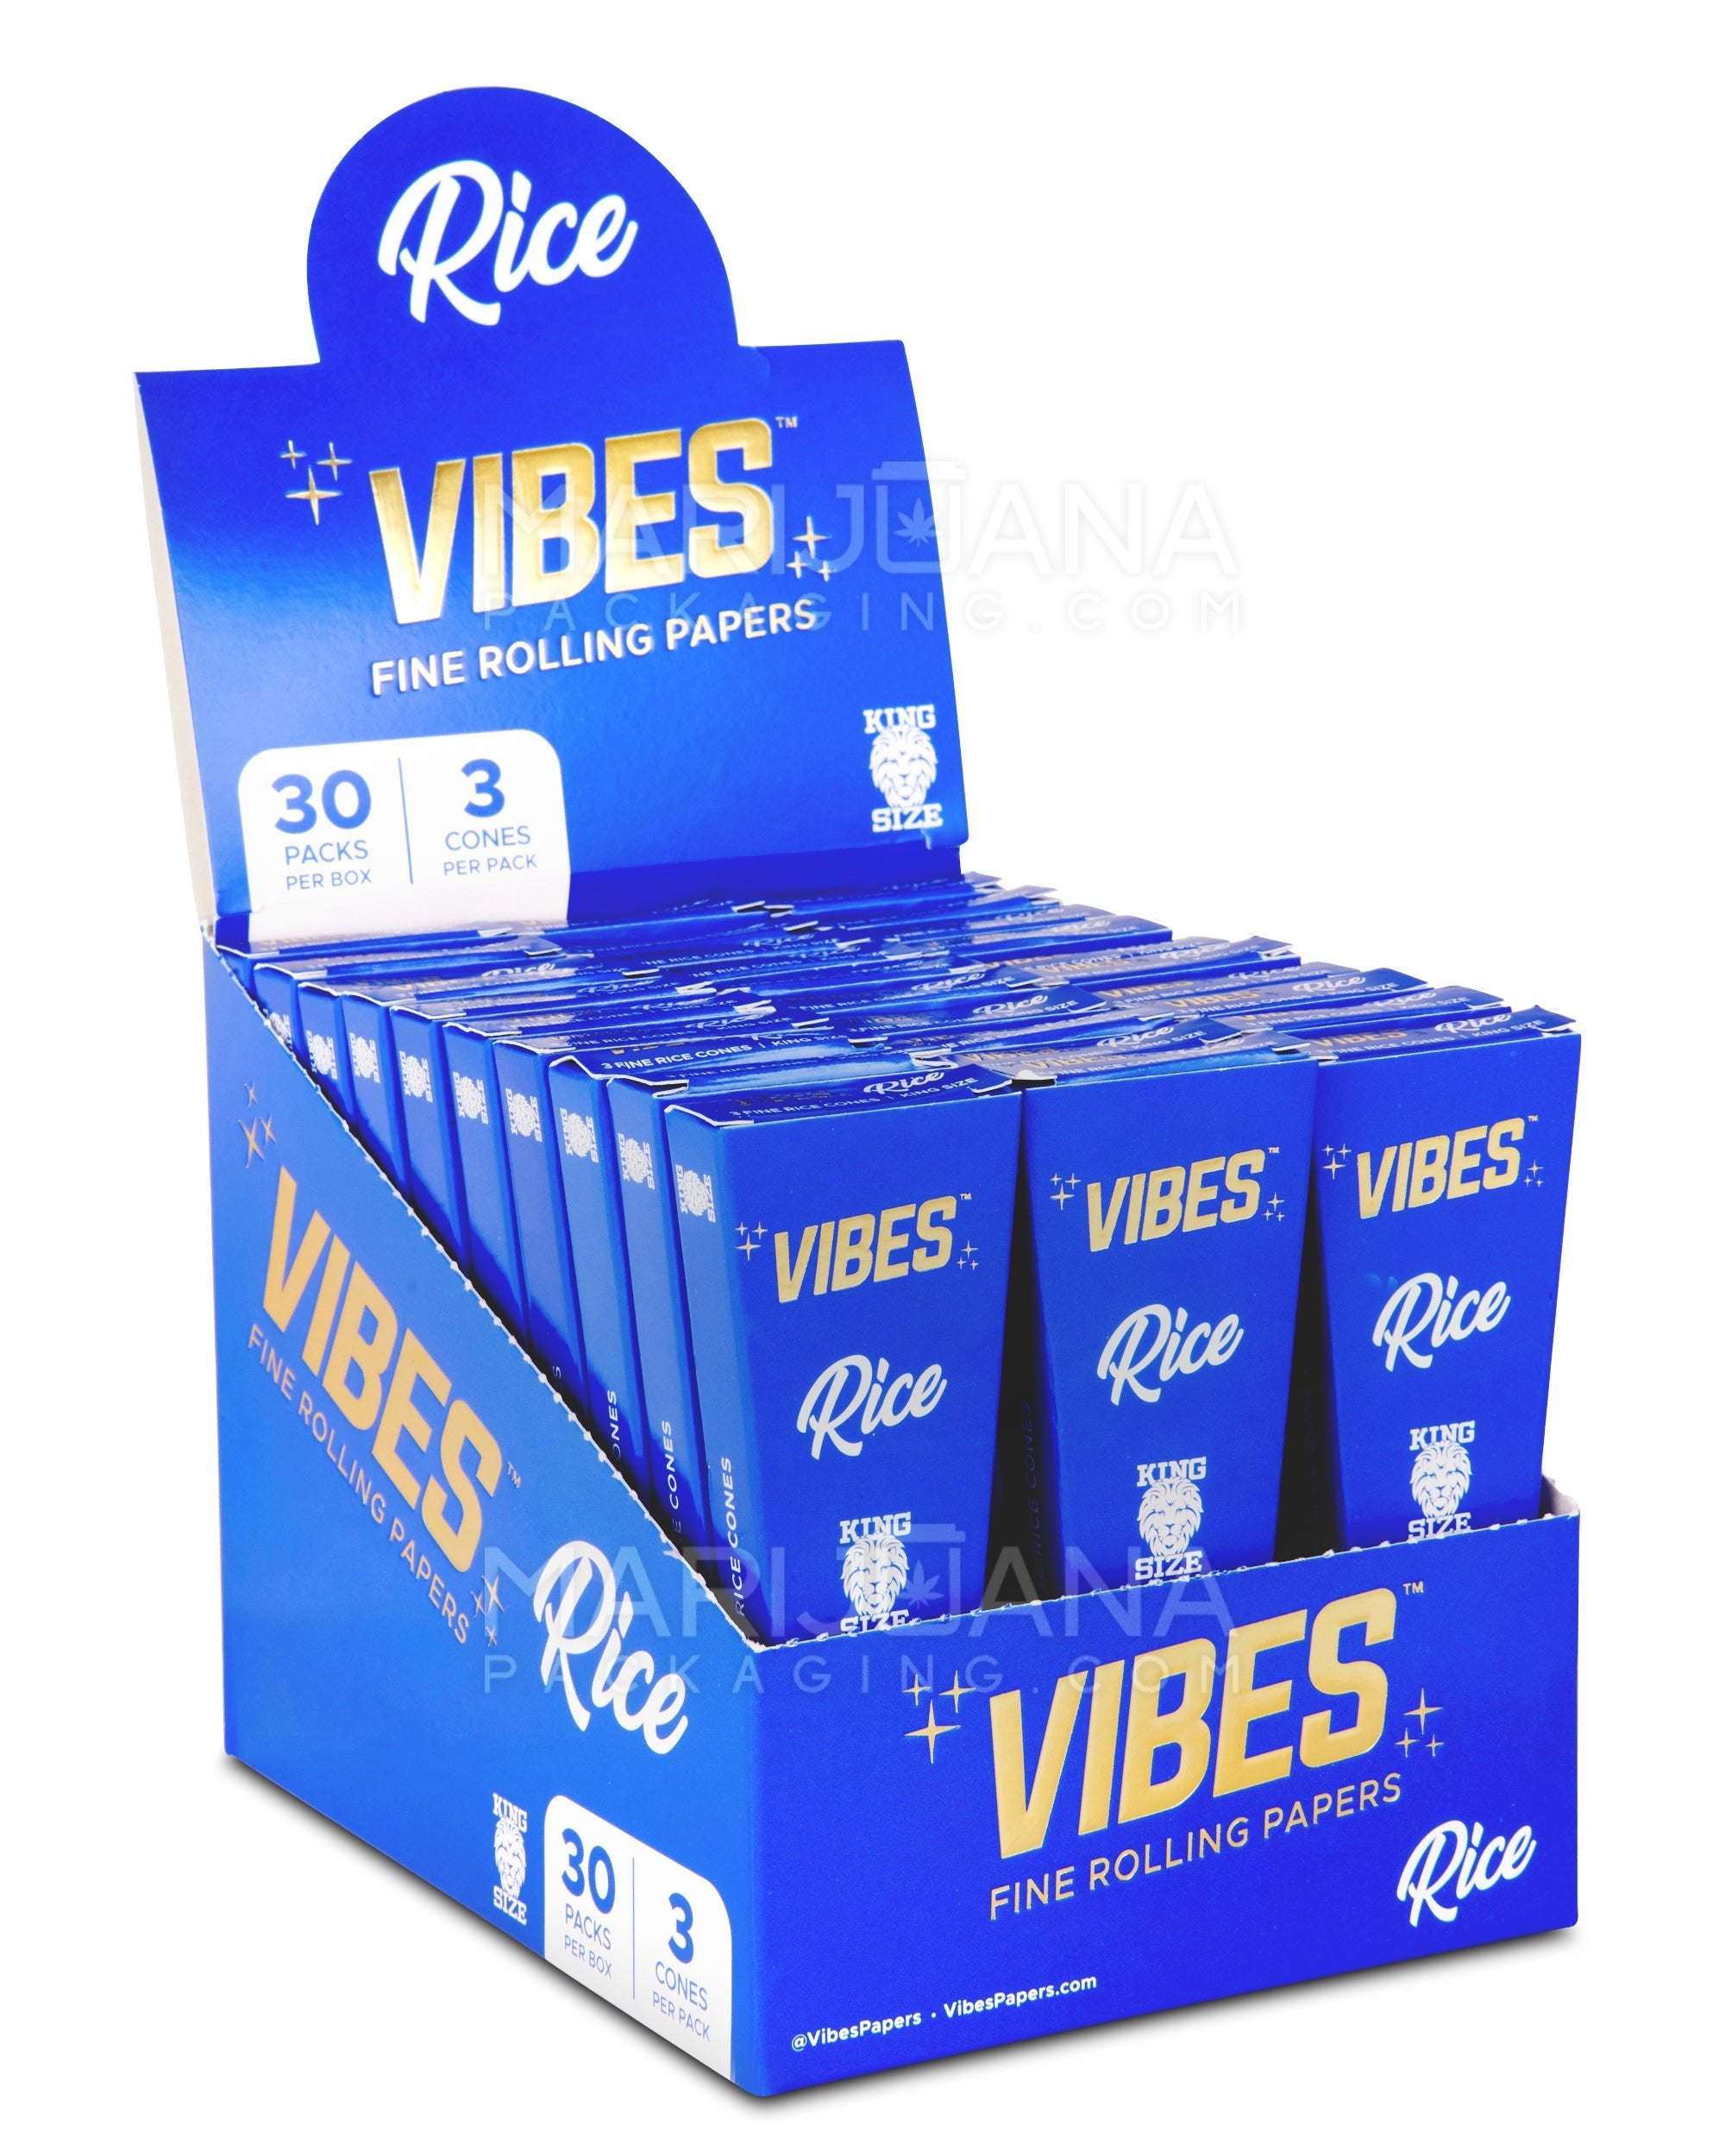 114VIBES PAPERS BOX - Rice - タバコグッズ